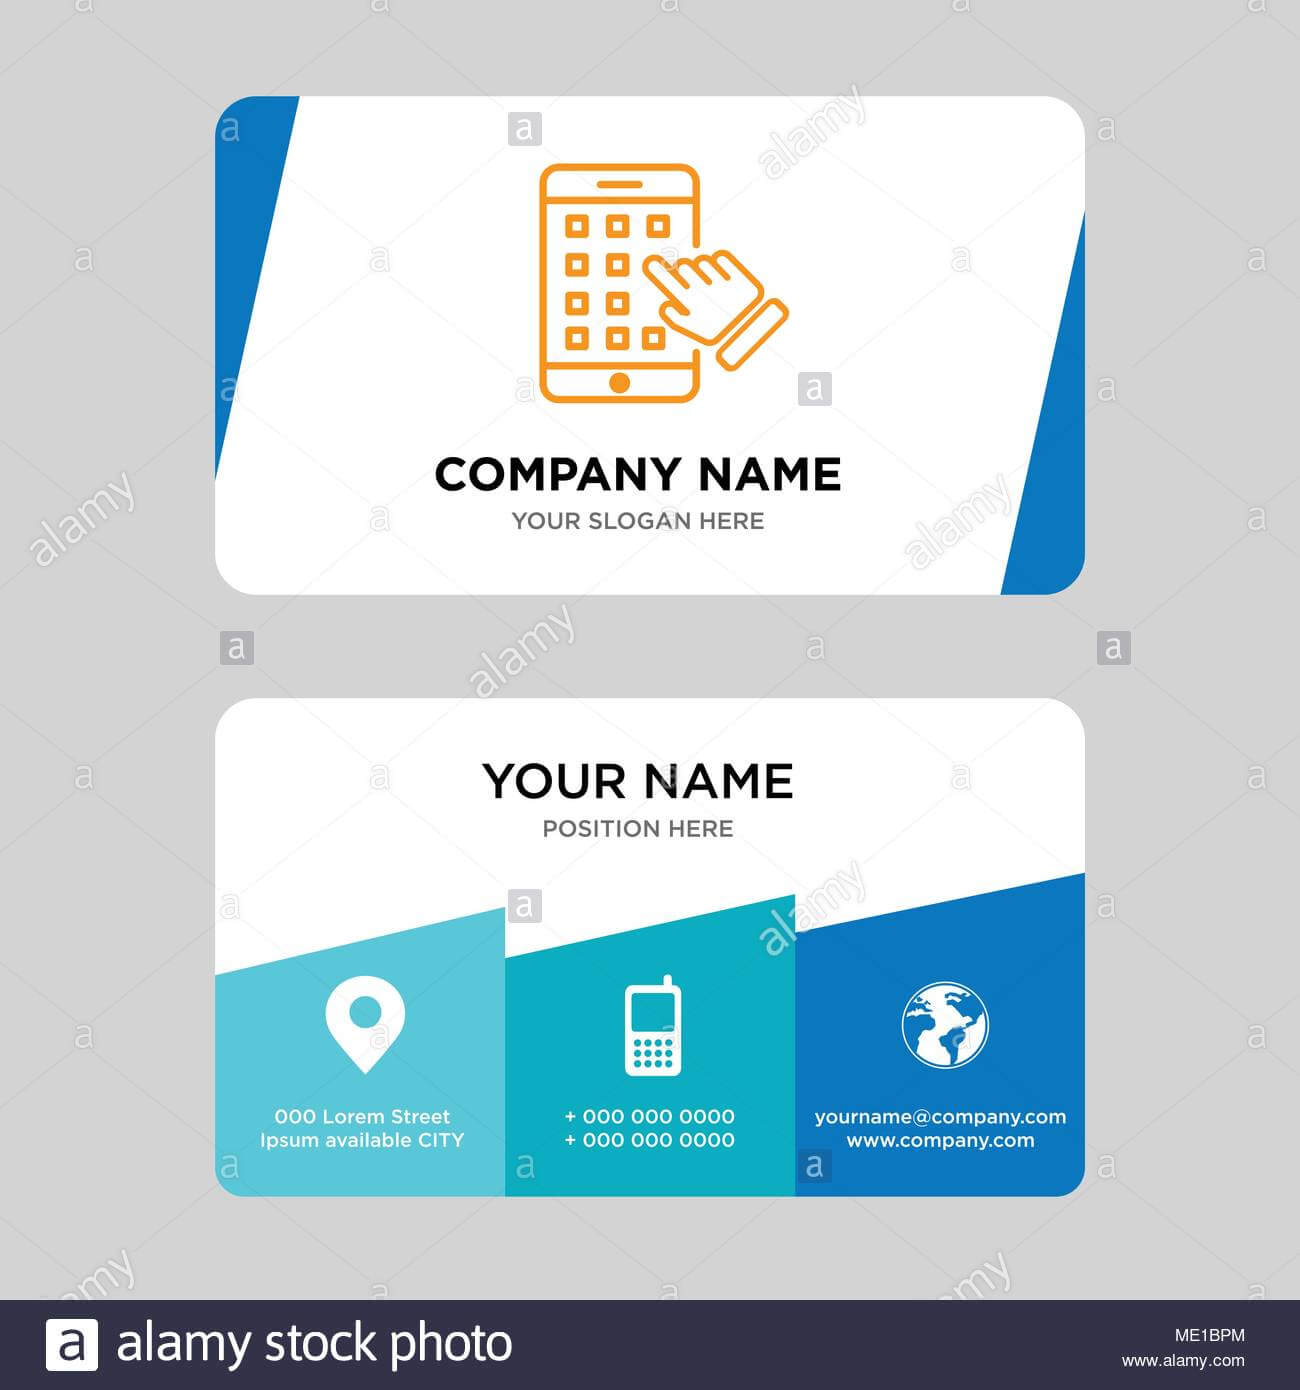 Iphone Business Card Design Template, Visiting For Your Within Iphone Business Card Template